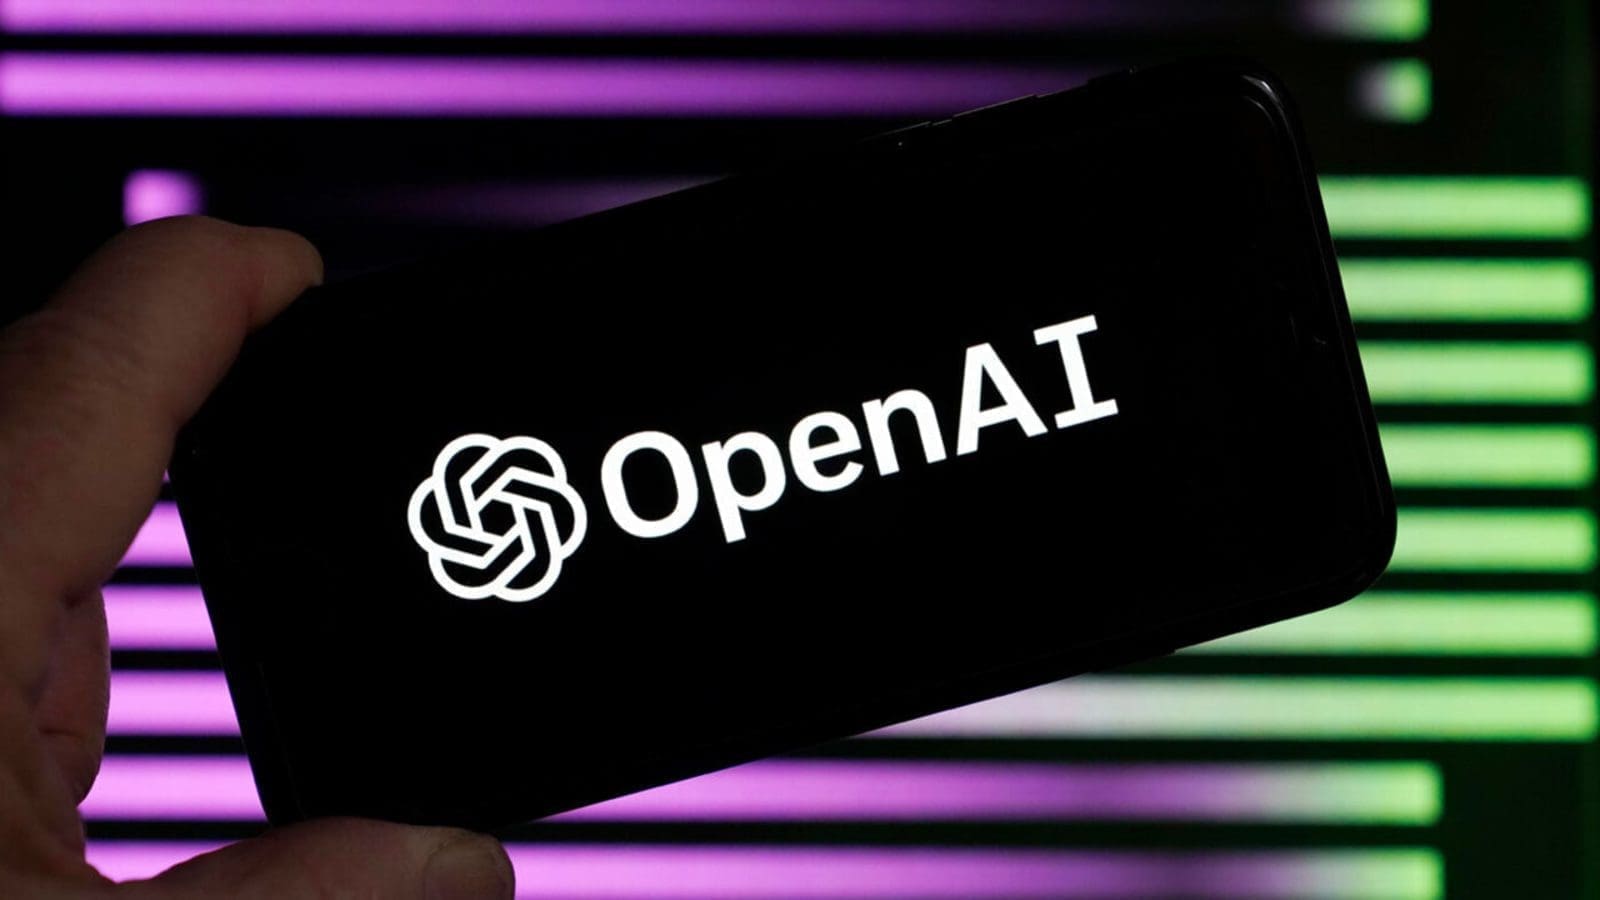 Coca-Cola to integrate OpenAI tools in marketing and digital communications in partners with Bain & Co.